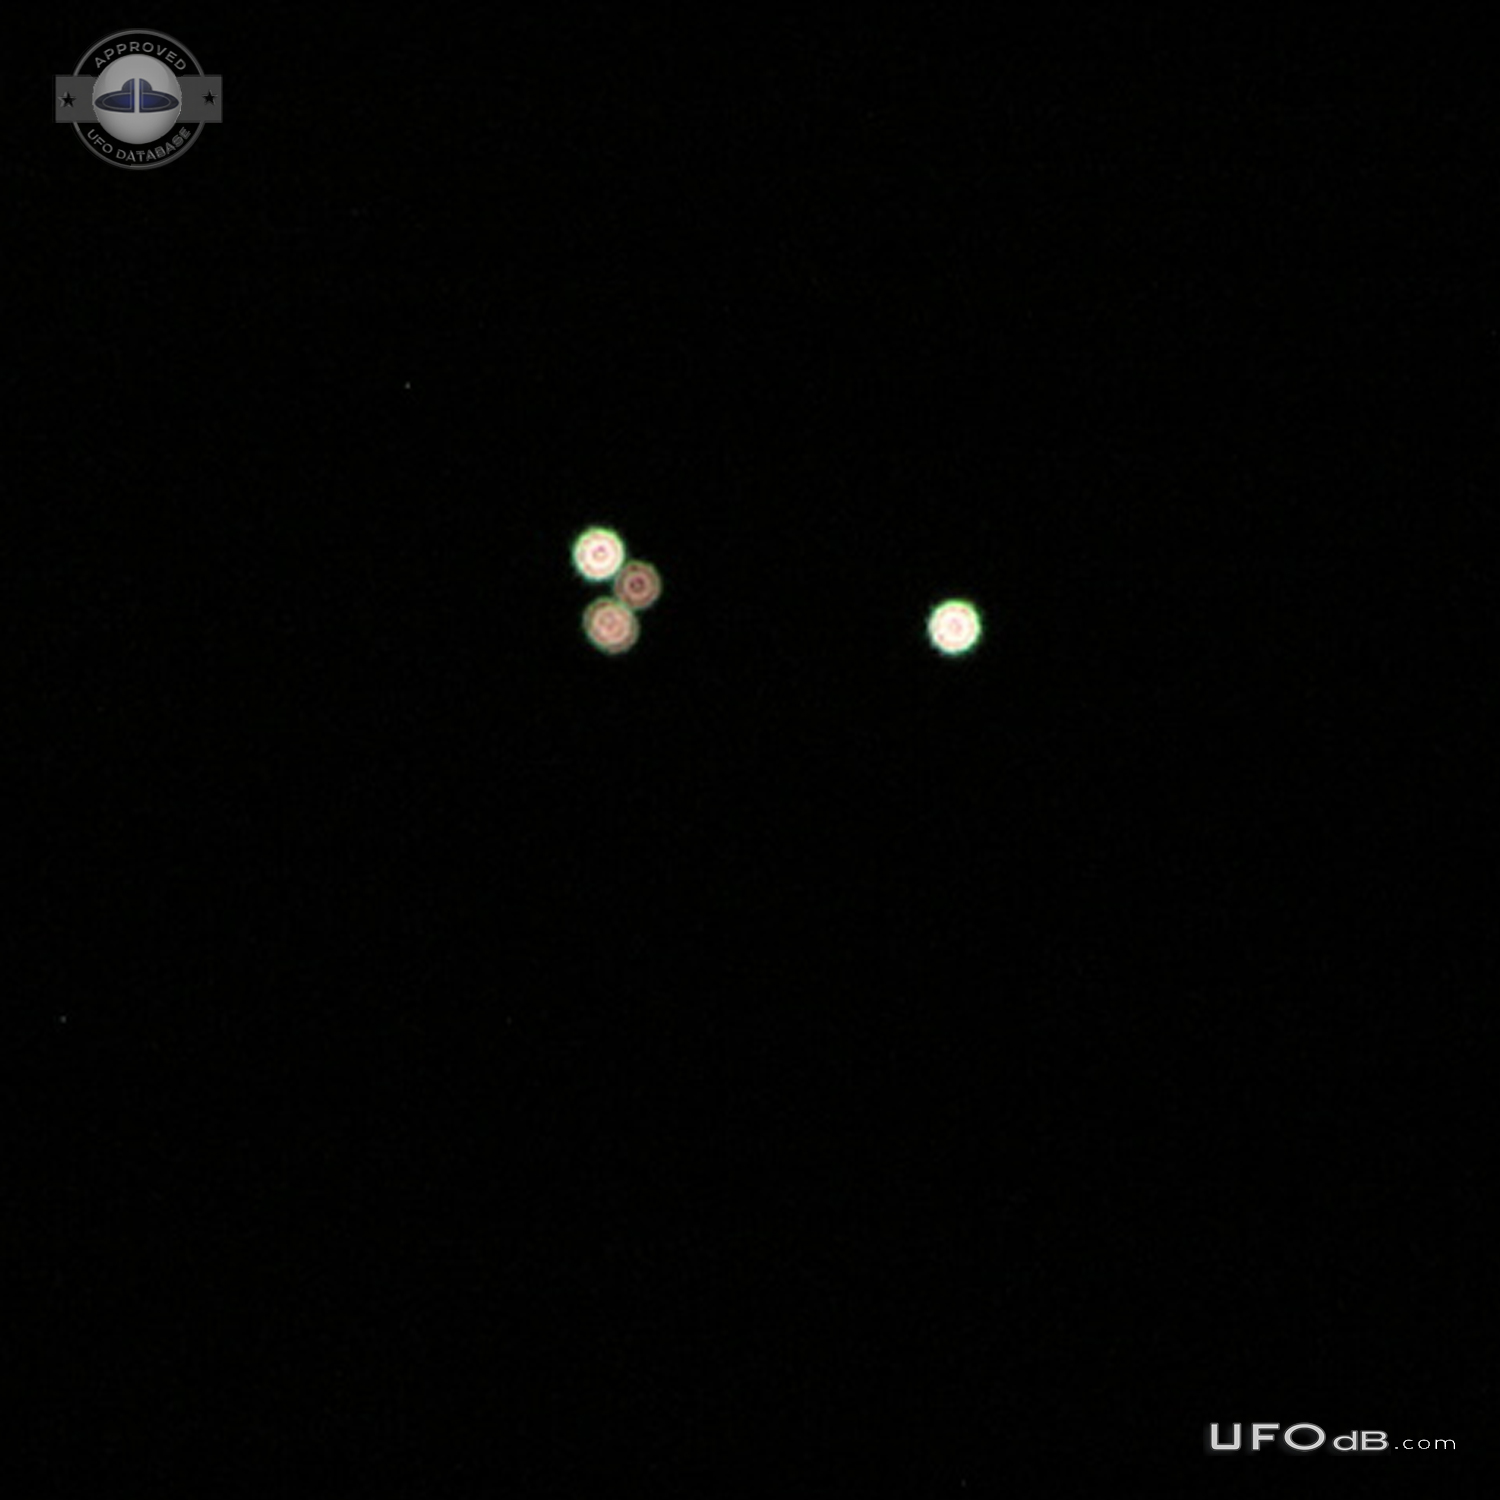 Multiple UFOs alternately flashing and circling each other in groups - UFO Picture #712-2